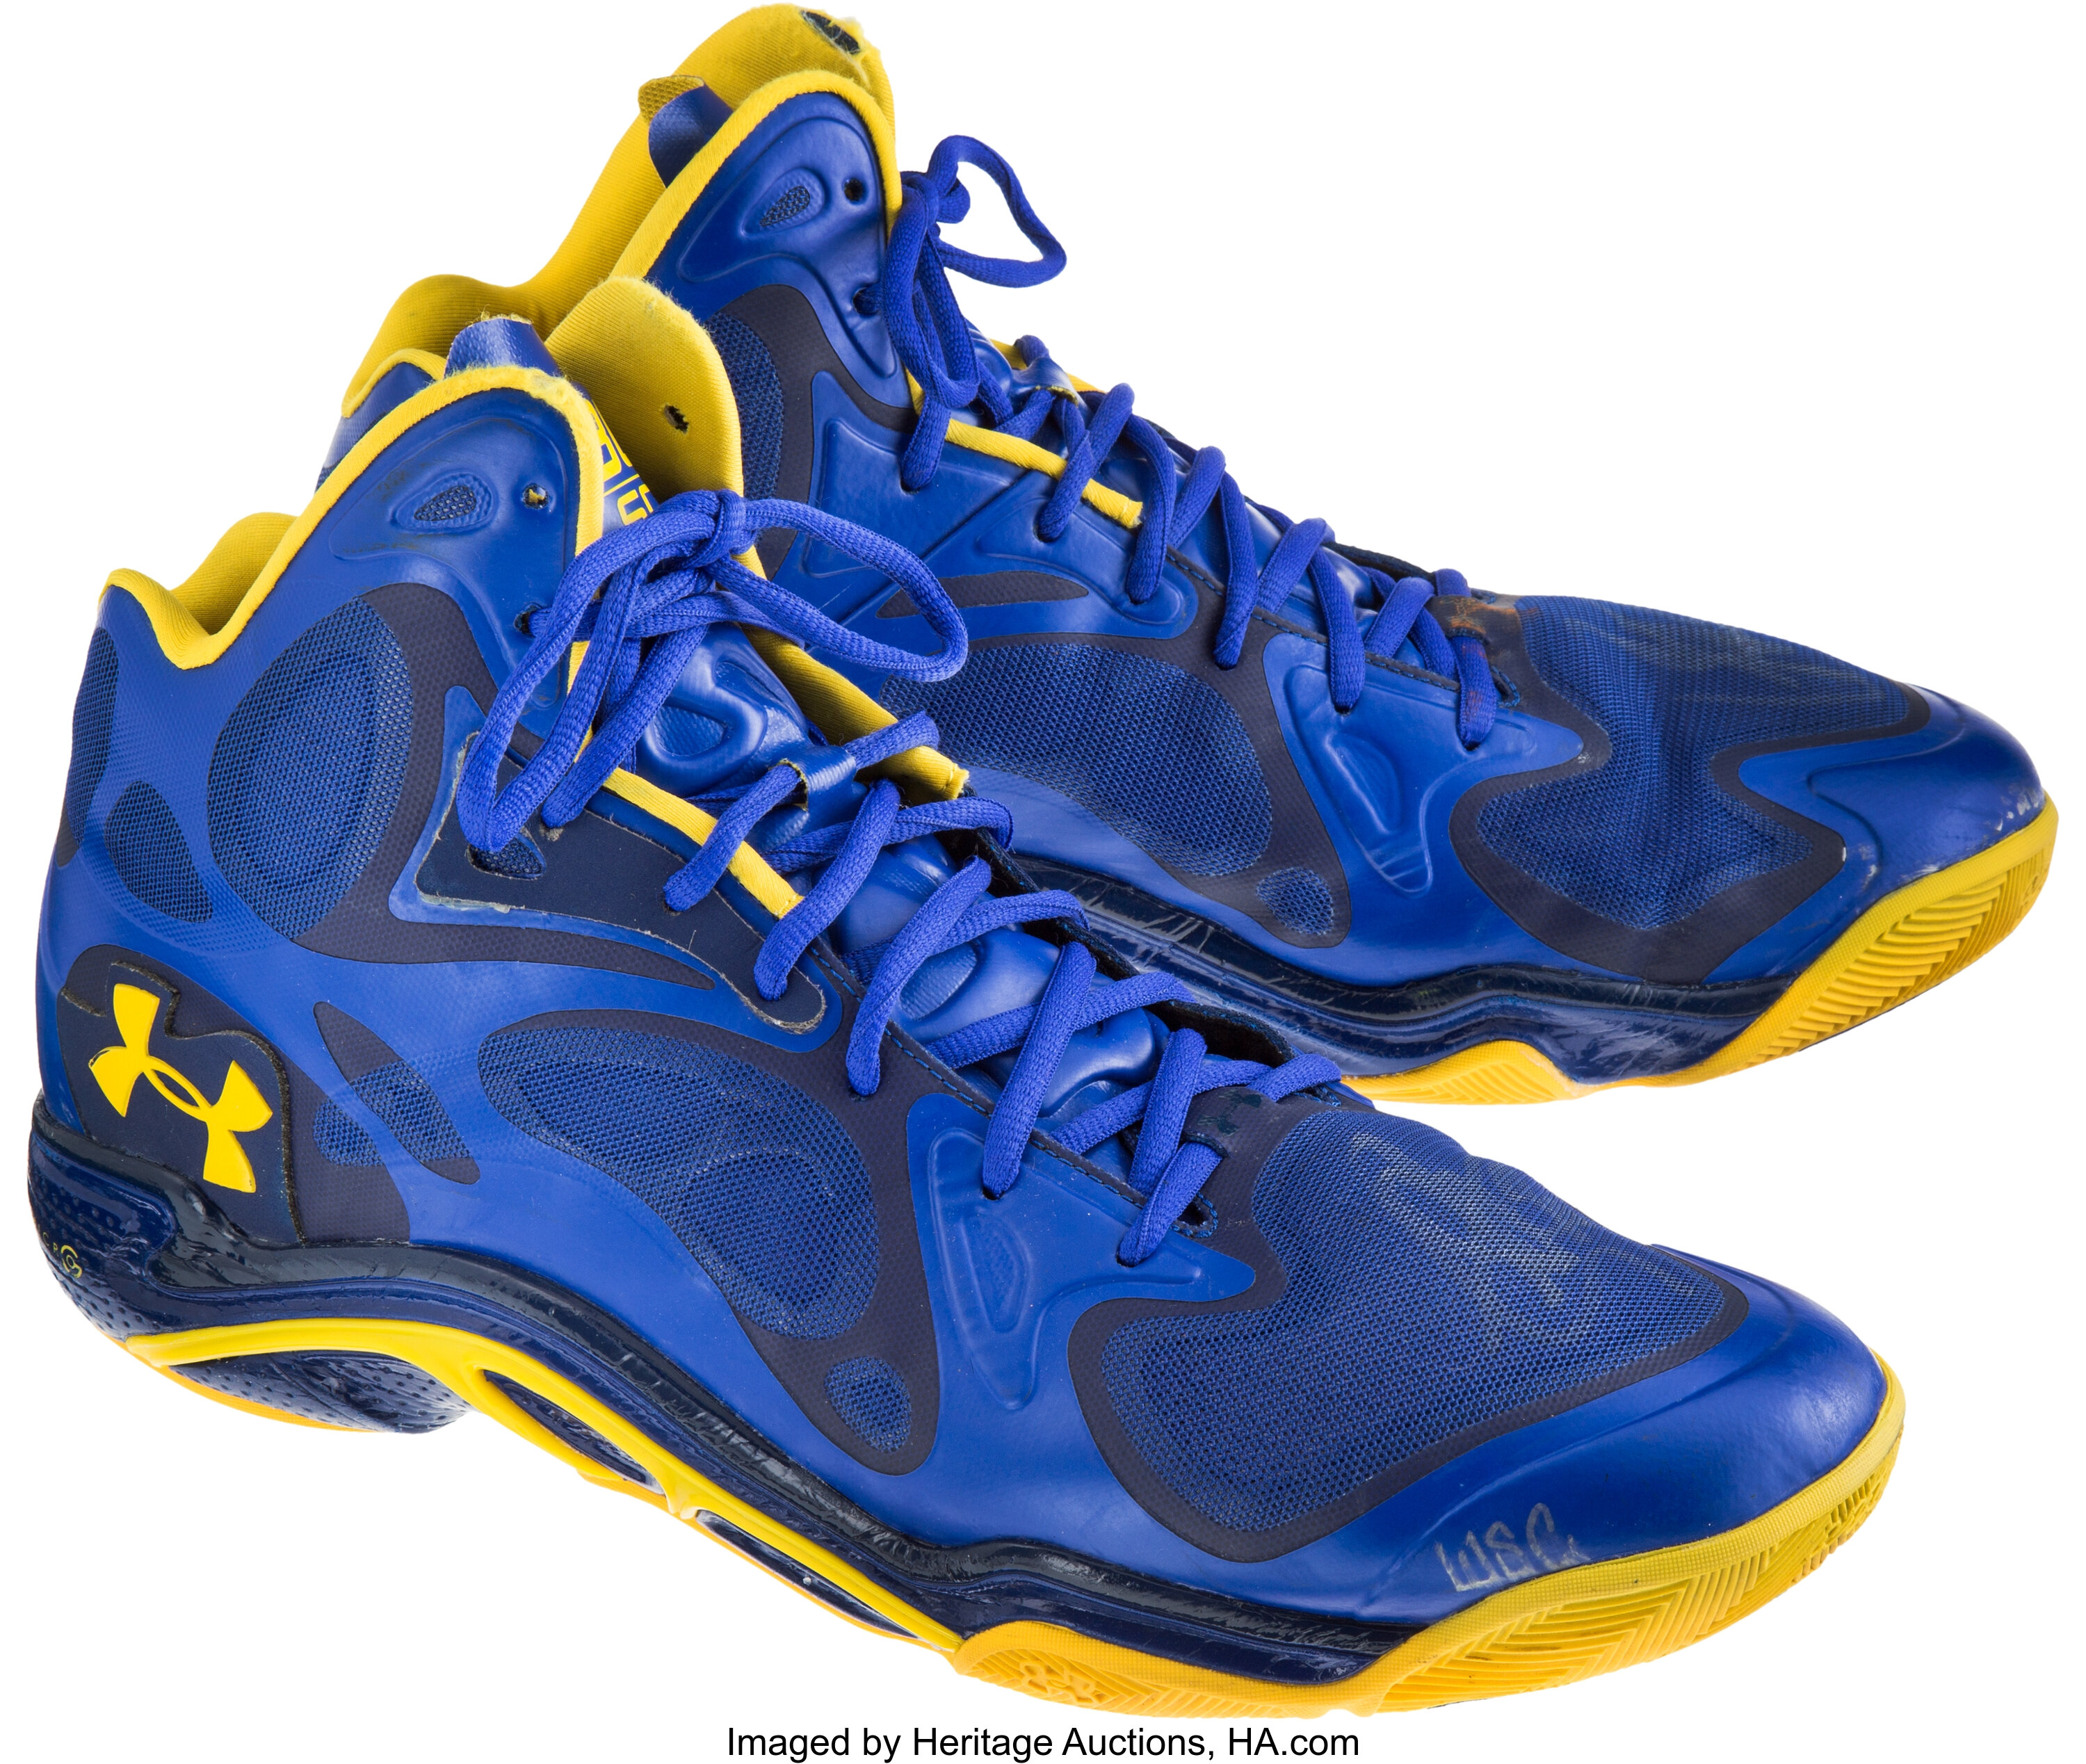 Stephen Curry - Golden State Warriors - Game-Worn Classic Edition